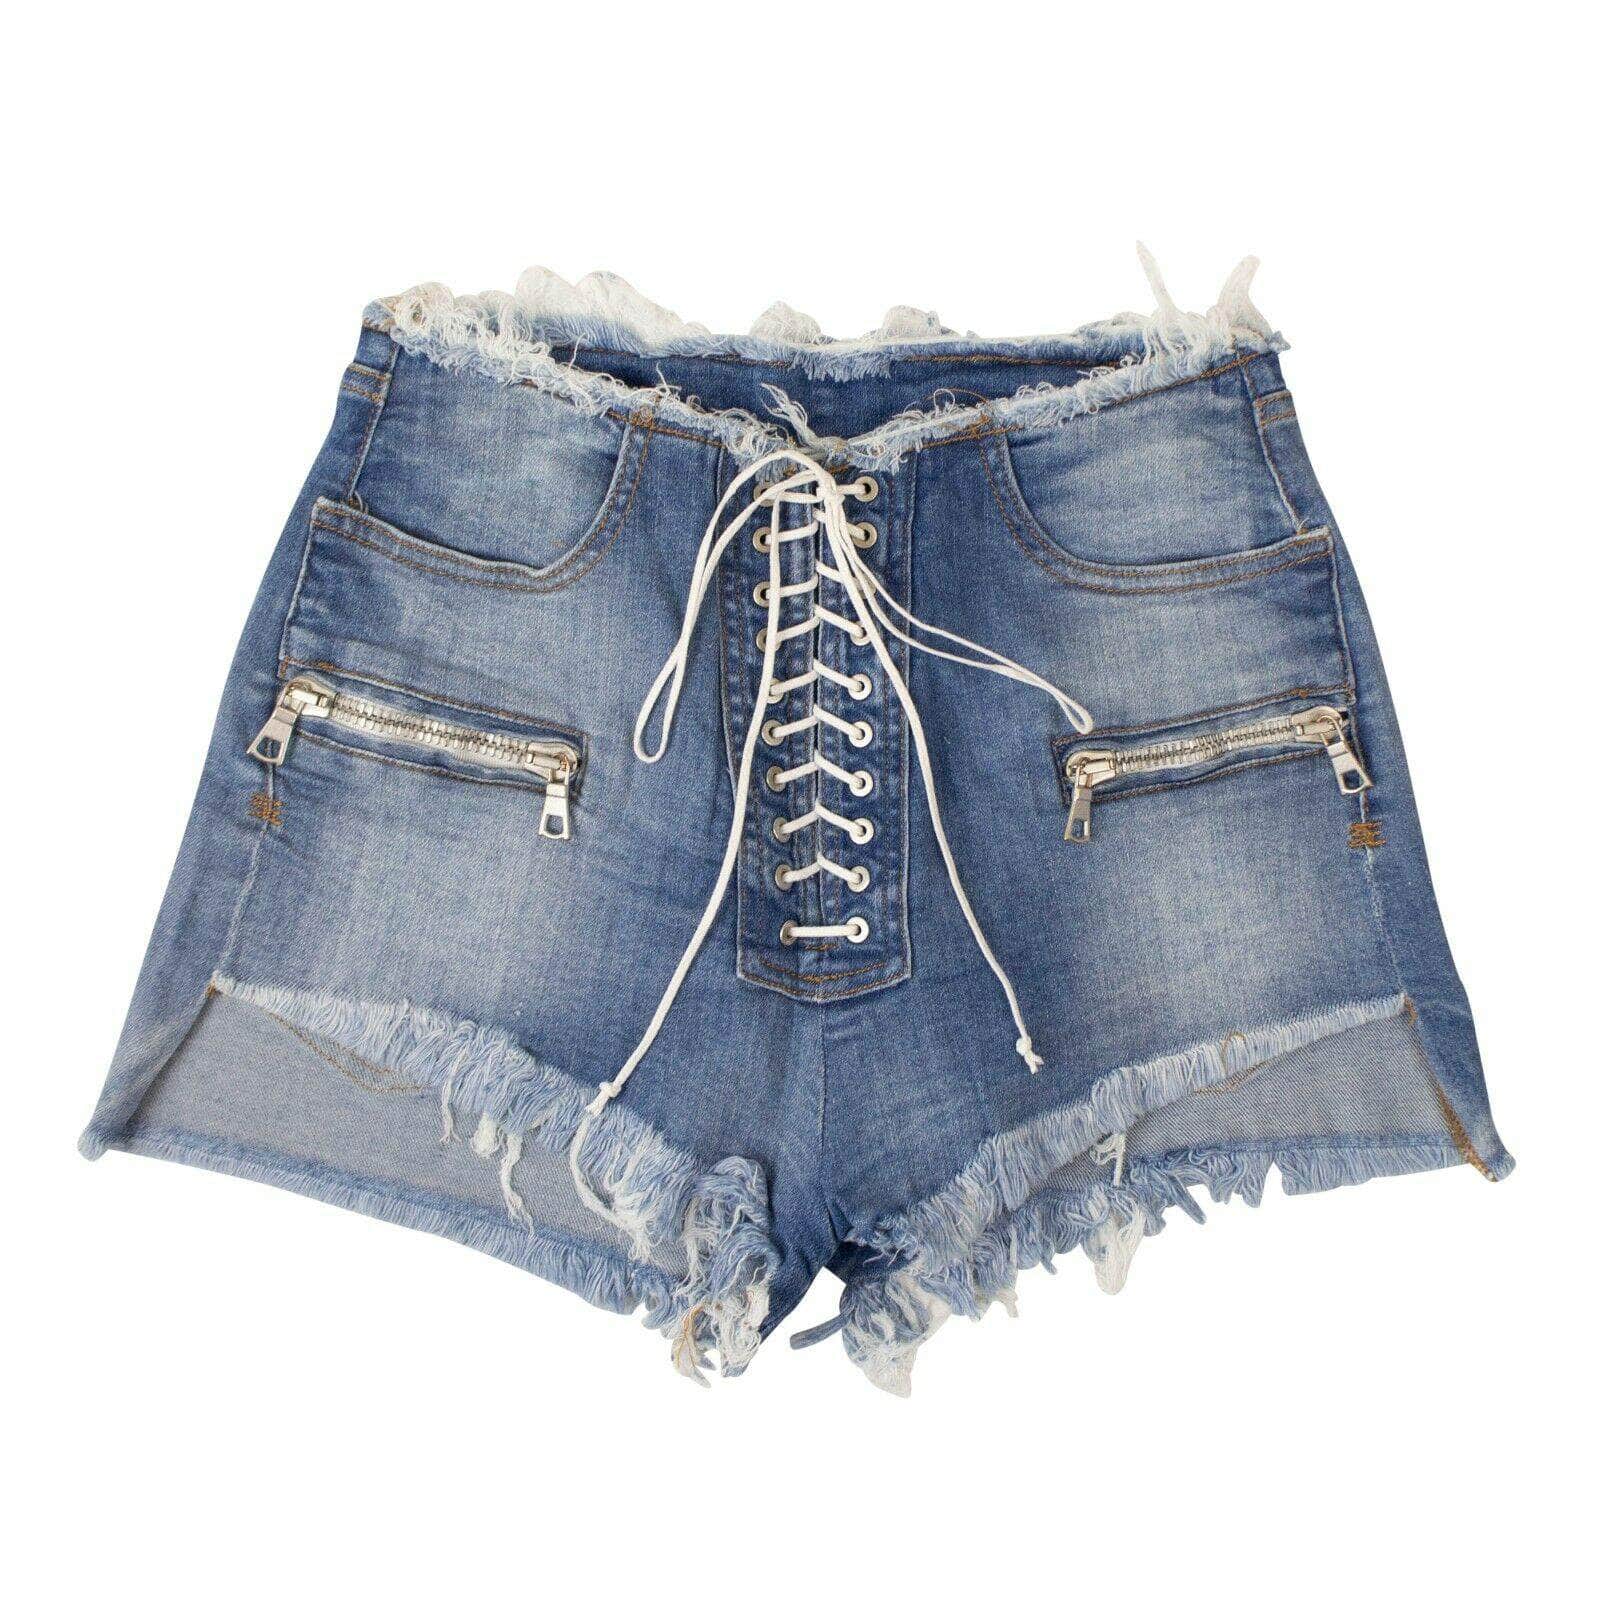 Unravel Project channelenable-all, chicmi, couponcollection, gender-womens, main-clothing, size-24, size-25, size-26, size-28, under-250, unravel-project Denim Lace-Up Shorts